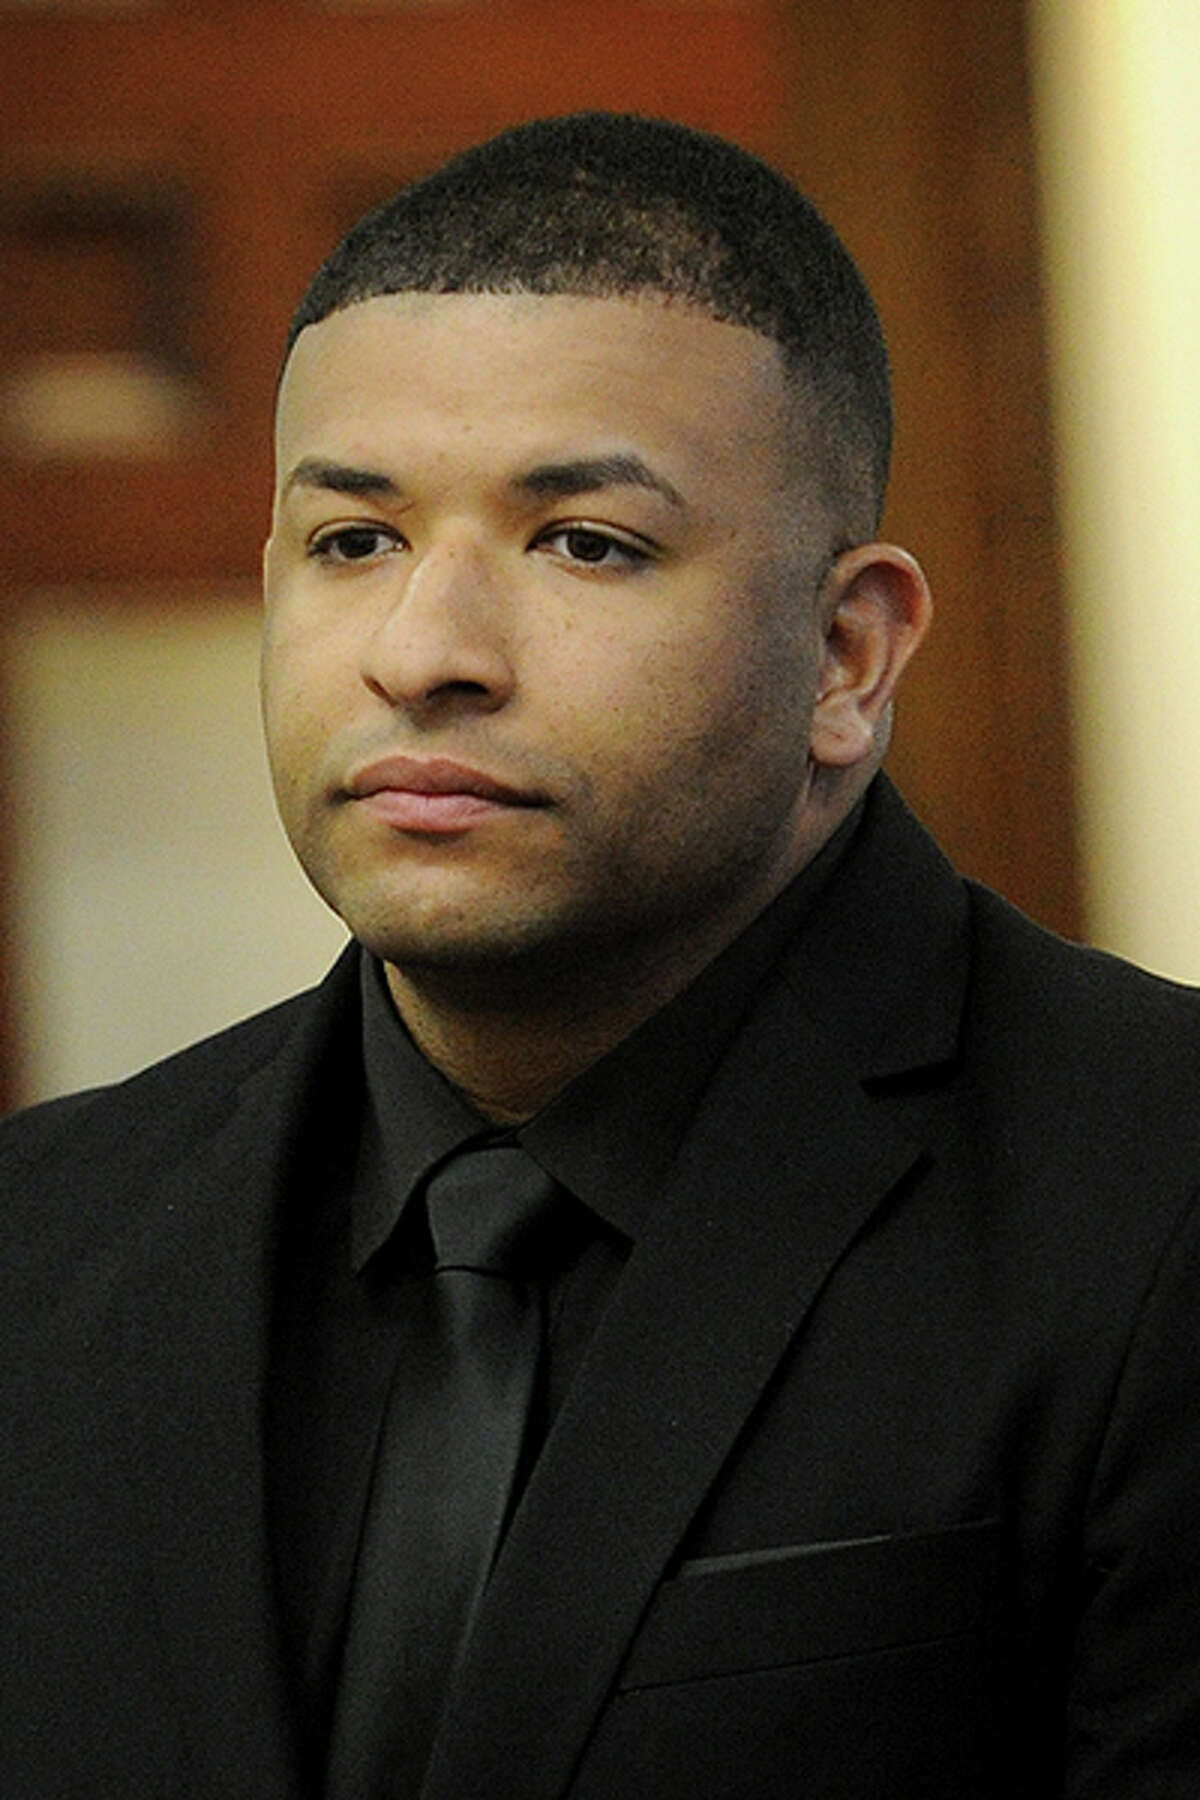 Bridgeport Police Officer Davon Polit, is arraigned on assault charges for the alleged beating of a city resident following a car collision in September, in Superior Court in Bridgeport, Conn. on Wednesday, March 29, 2017.